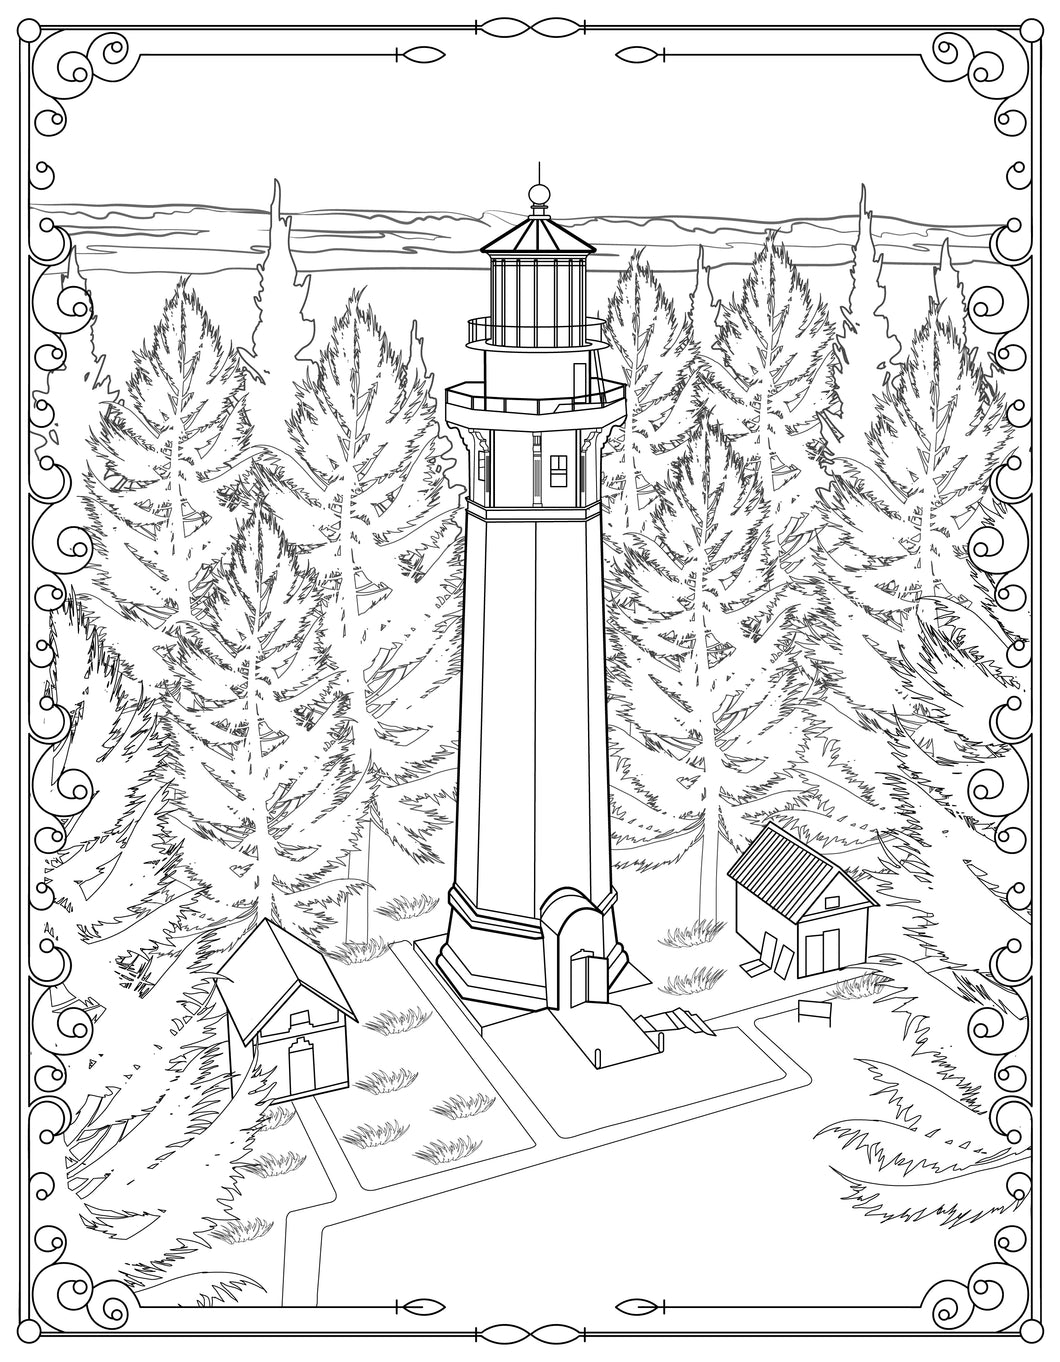 Single Coloring Book Page - Grays Harbor Lighthouse, Washington - Digital Print-from-Home